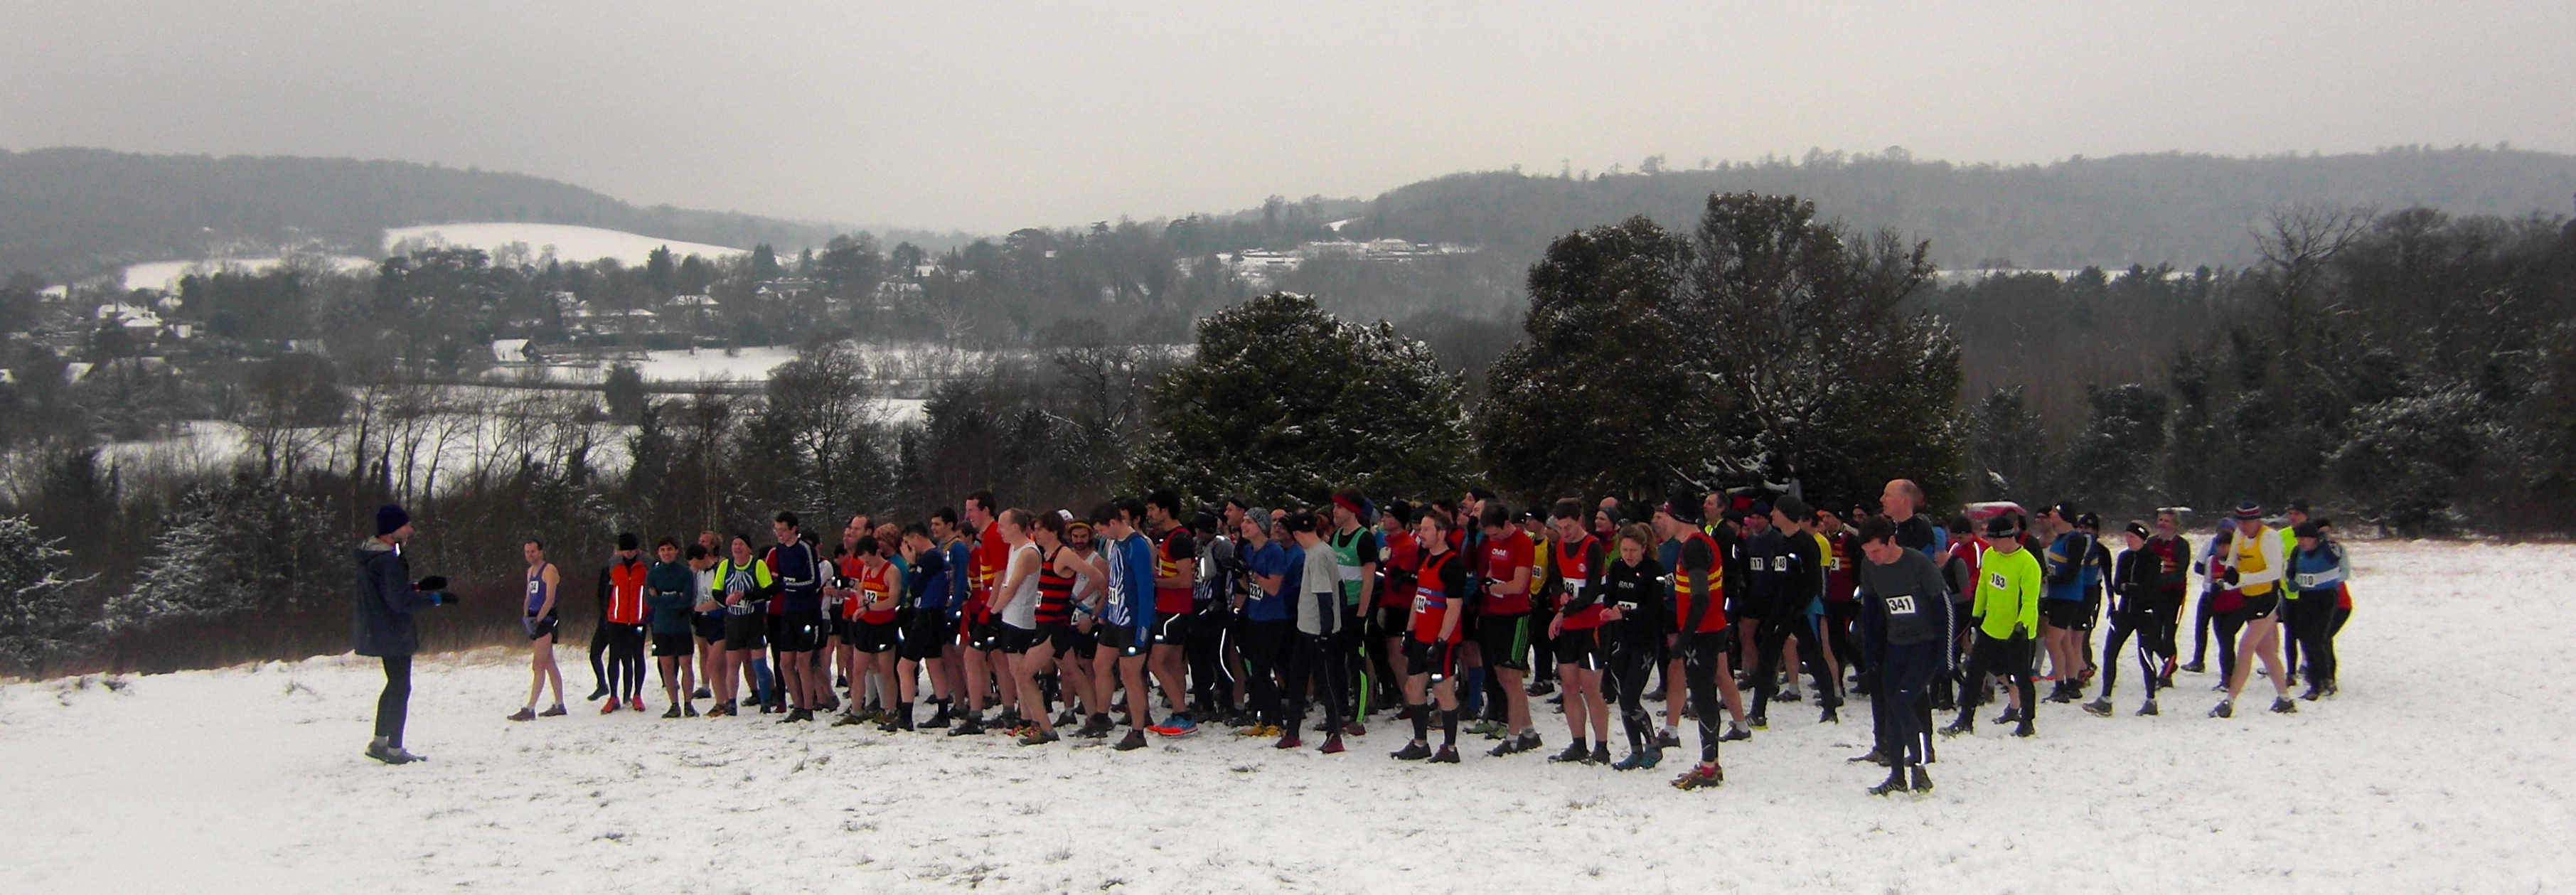 Runners gather on the snowy start line for the 32nd Box Hill Fell Race